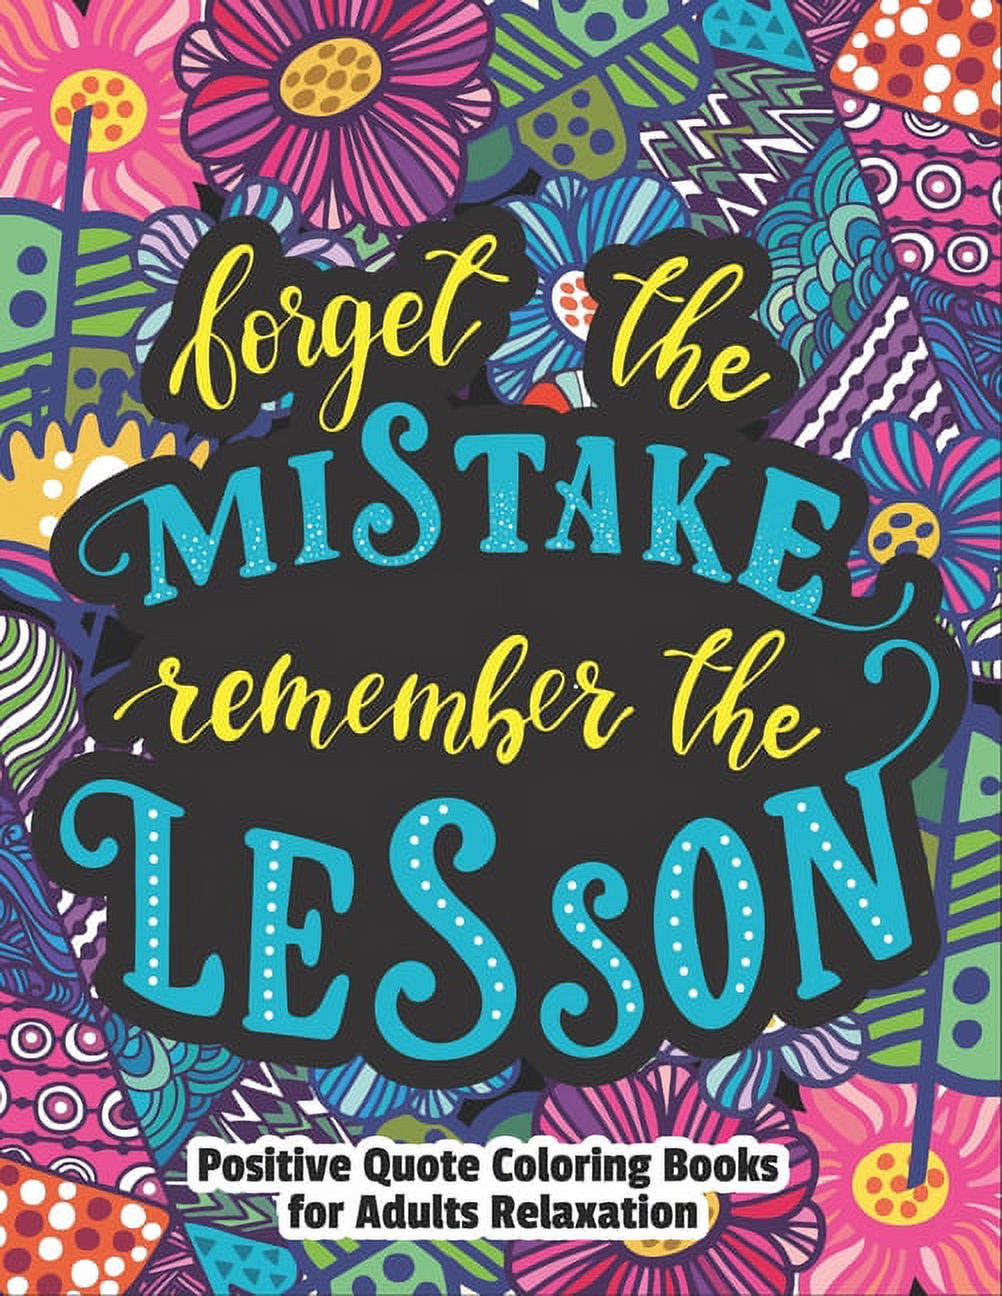 Forget The Mistake Remember The lesson-Positive quote coloring books for adults relaxation : Uplifting Quotes During These Difficult Times with Positively Inspired color away pandemic chaos gorgeous fantasy anti-stress Relieving art therapy best gif (Paperback) - image 1 of 1